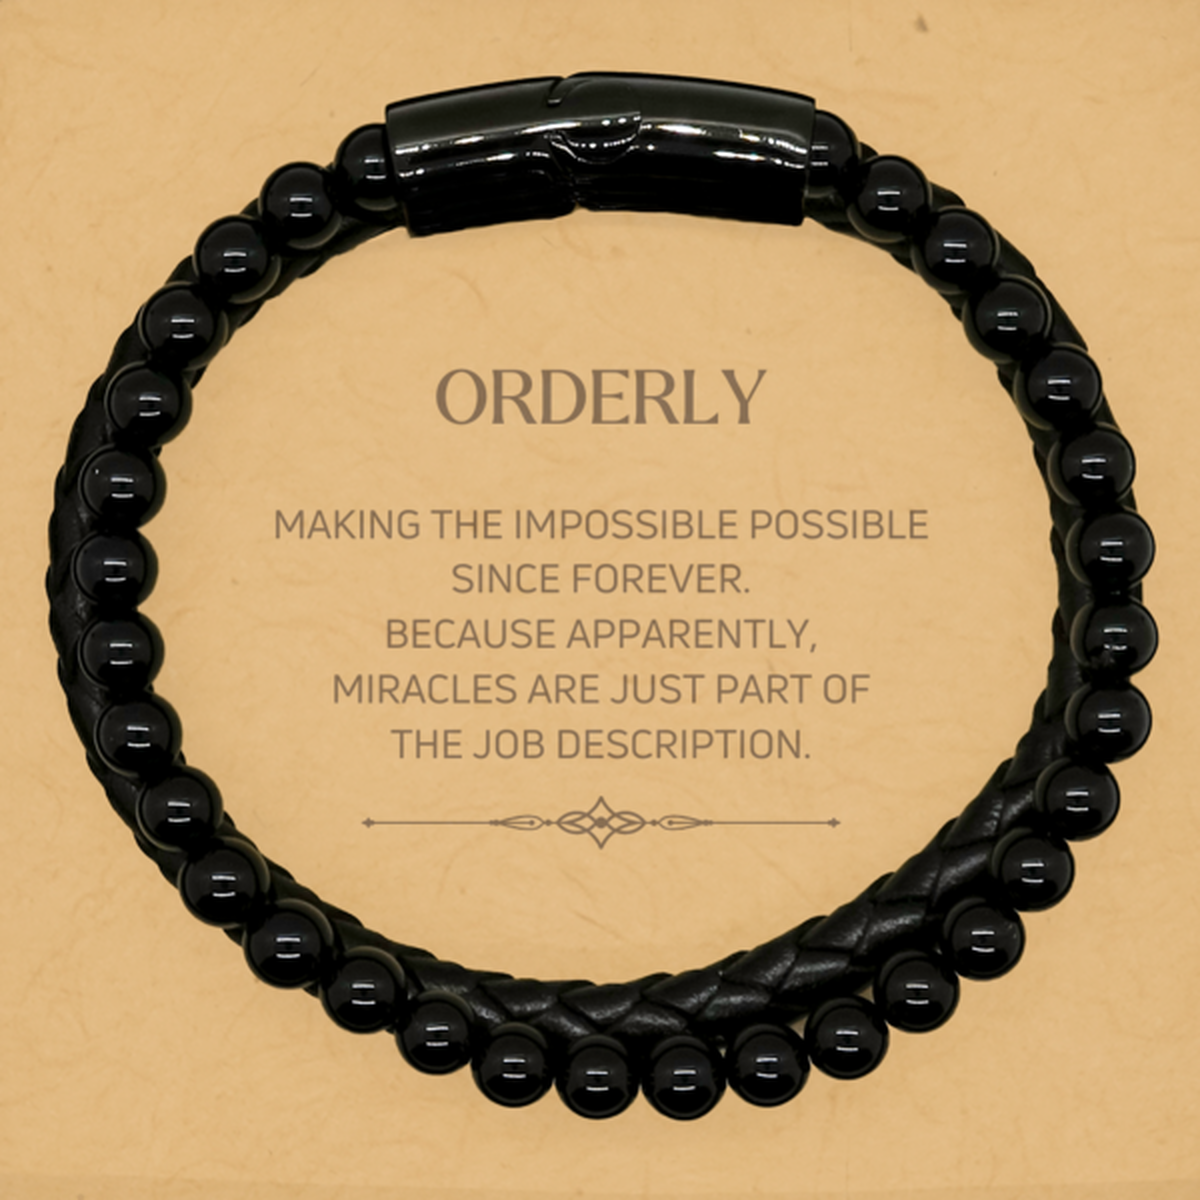 Funny Orderly Gifts, Miracles are just part of the job description, Inspirational Birthday Stone Leather Bracelets For Orderly, Men, Women, Coworkers, Friends, Boss